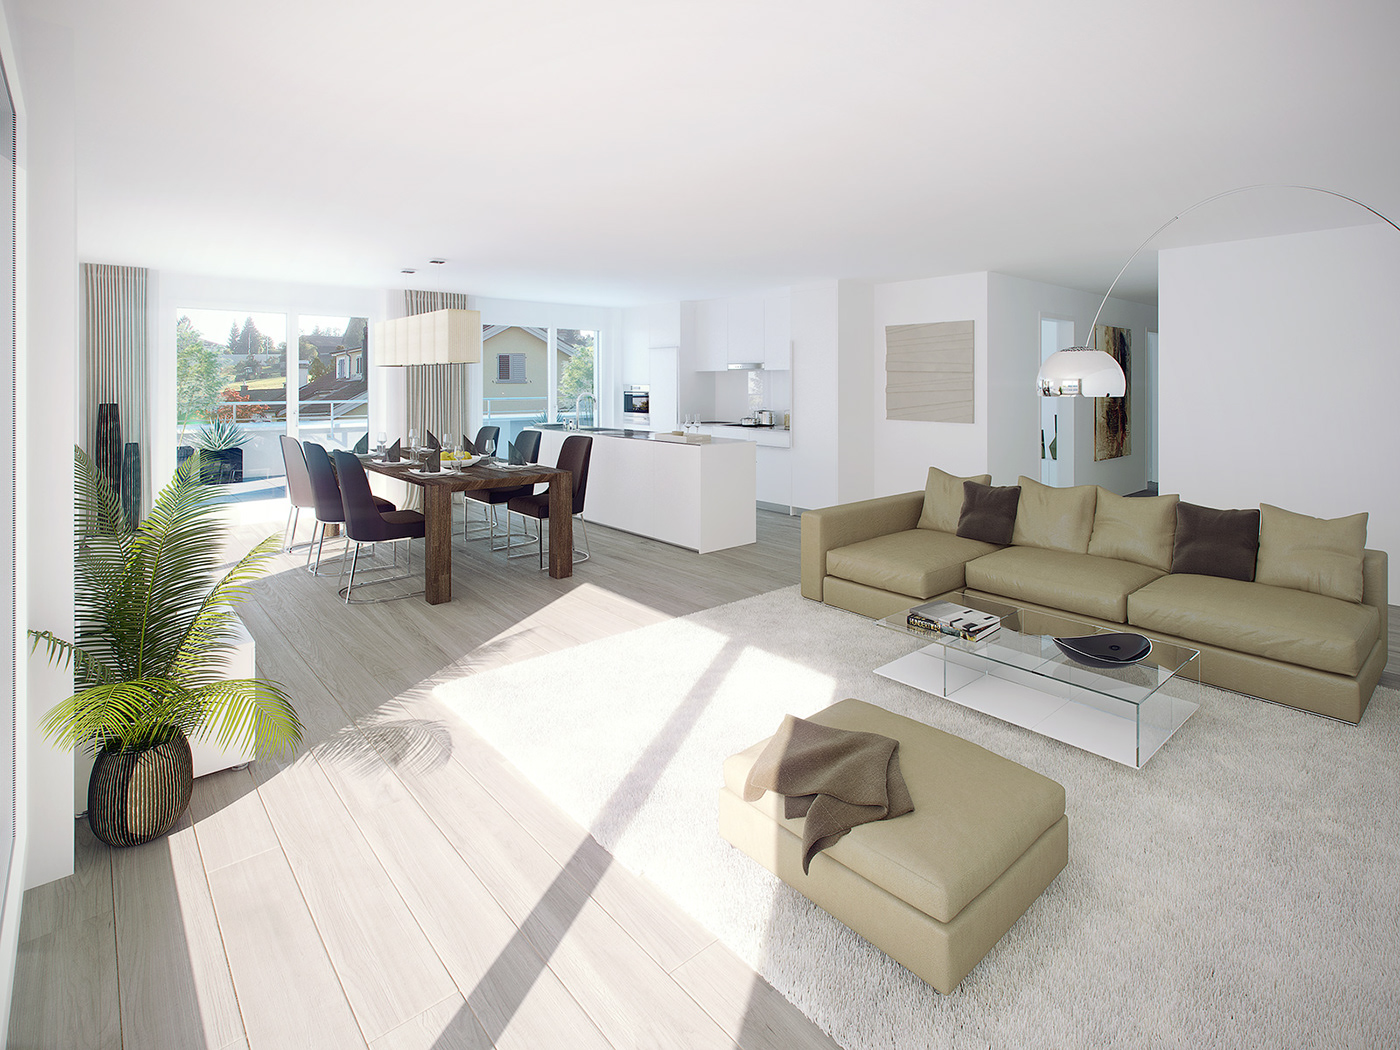 3D redidence building CGI CG graphic exterior Interior living childern furniture Day Render